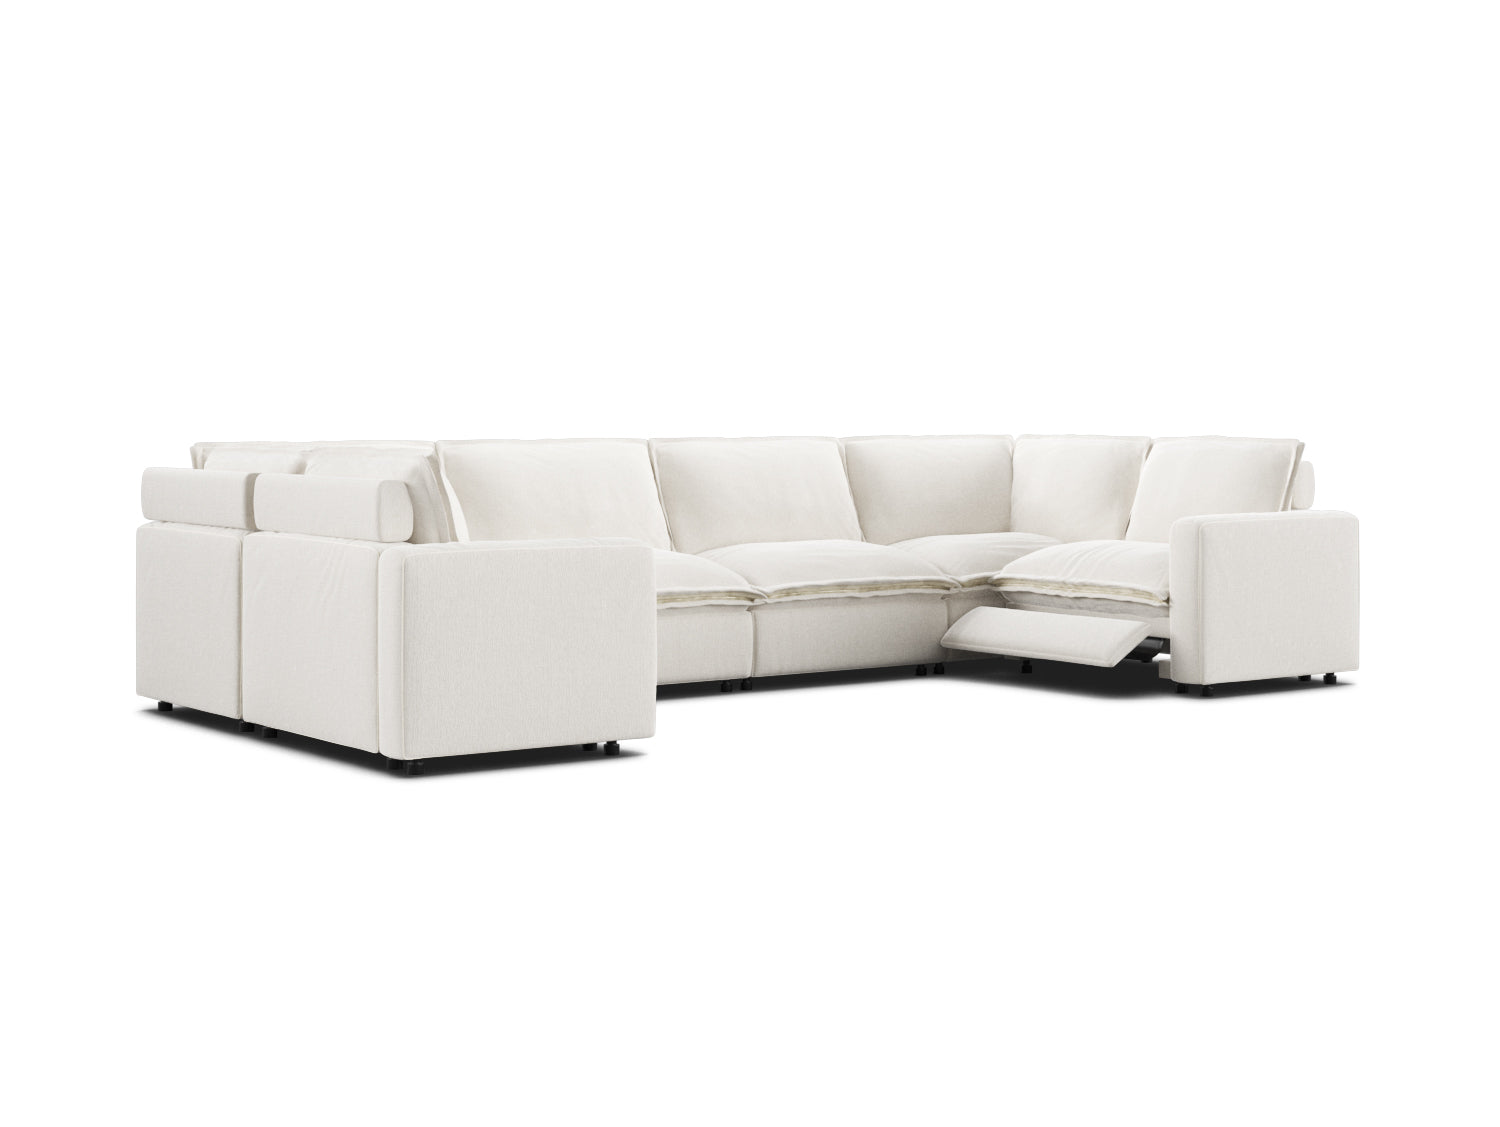 U-shaped sectional with one recliner in white linen, modular